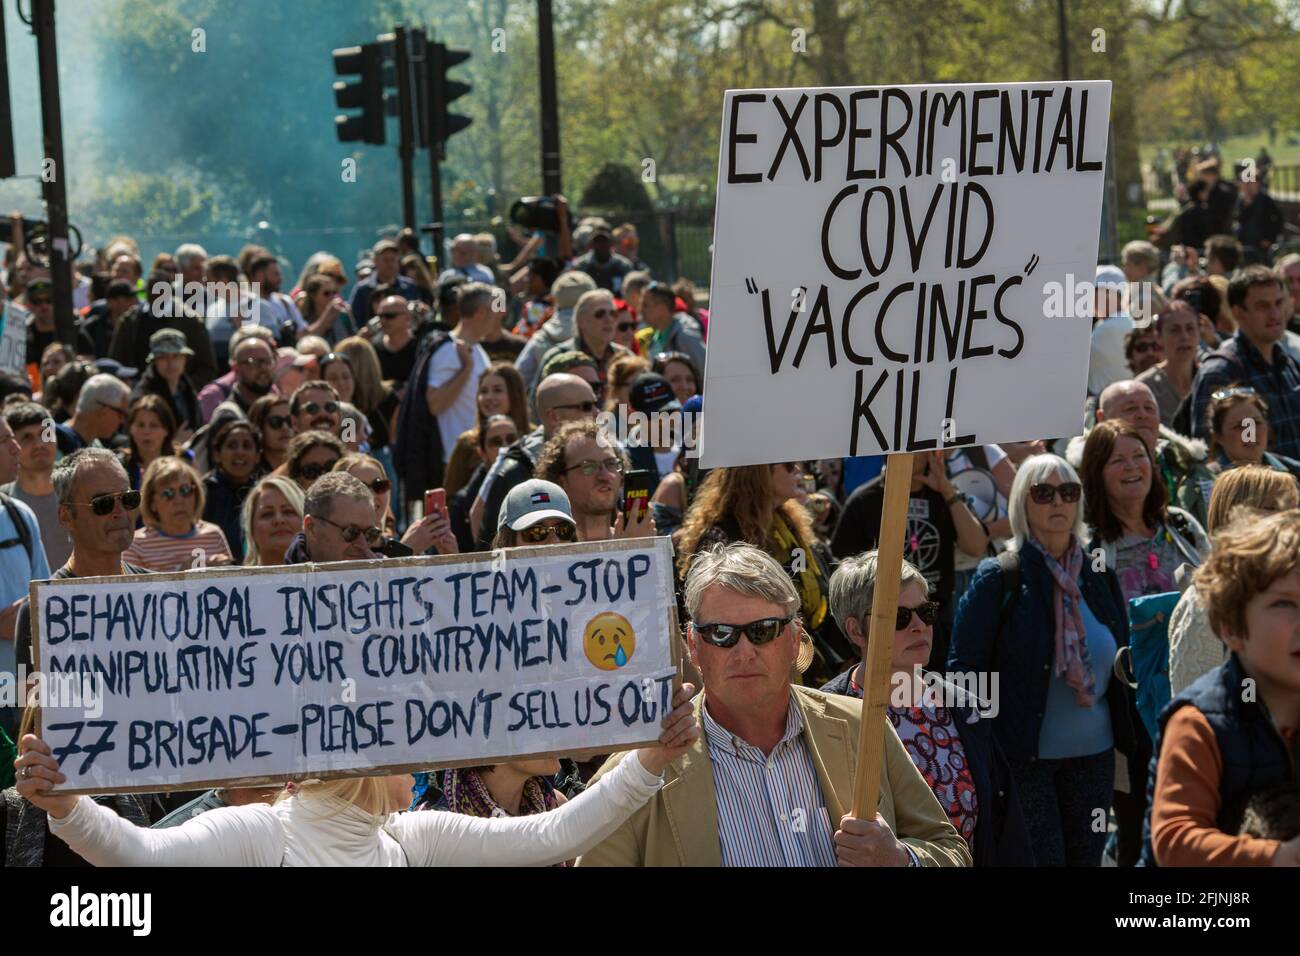 April 24, 2021, London, England, United Kingdom: Thousands marched up London Oxford Street in Unite For Freedom protest against coronavirus restrictio Stock Photo